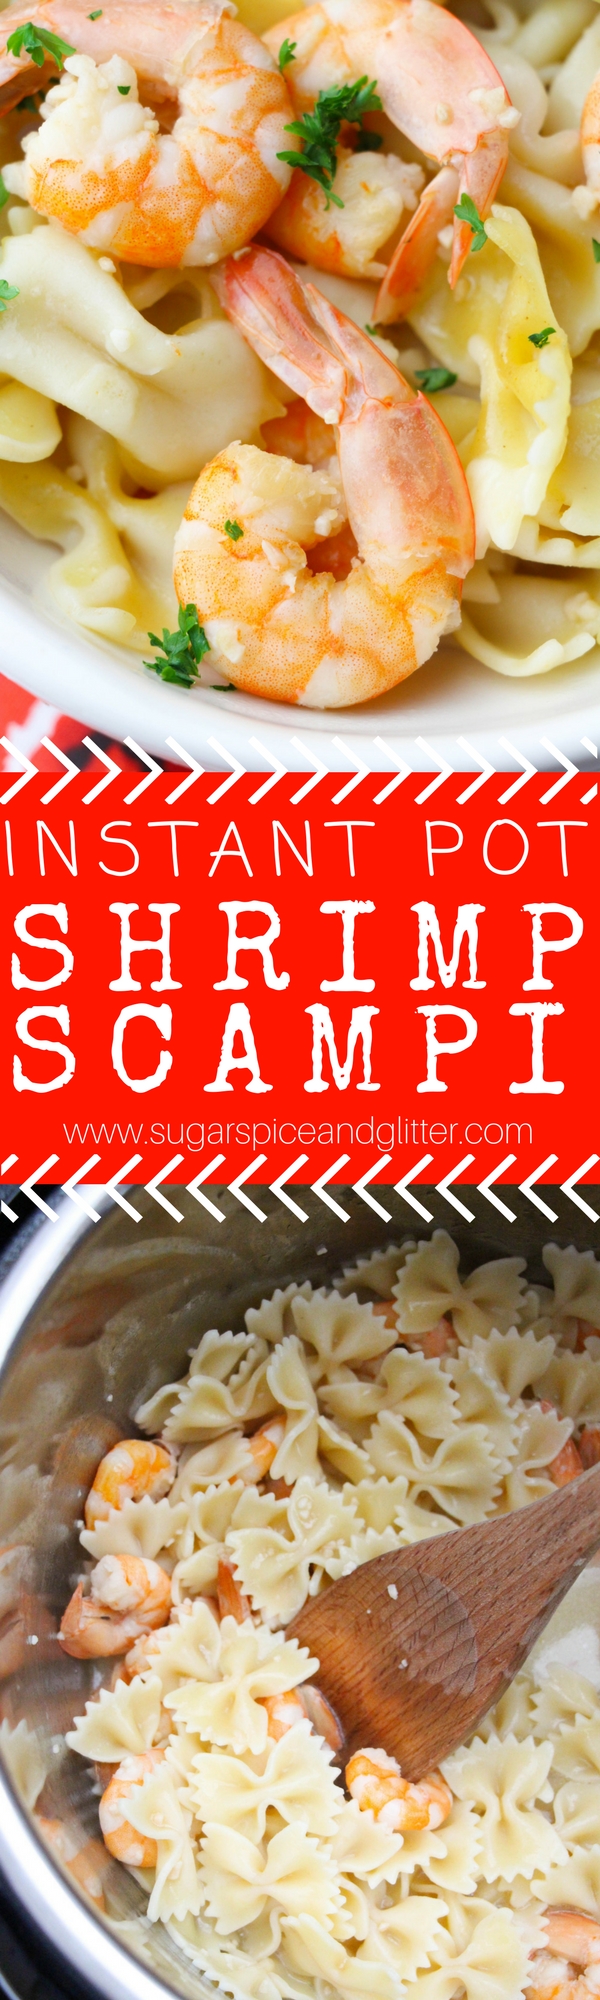 Garlicky, buttery Instant Pot Shrimp Scampi - a 15-minute meal for busy weeknights. A delicious seafood pasta recipe your family will love